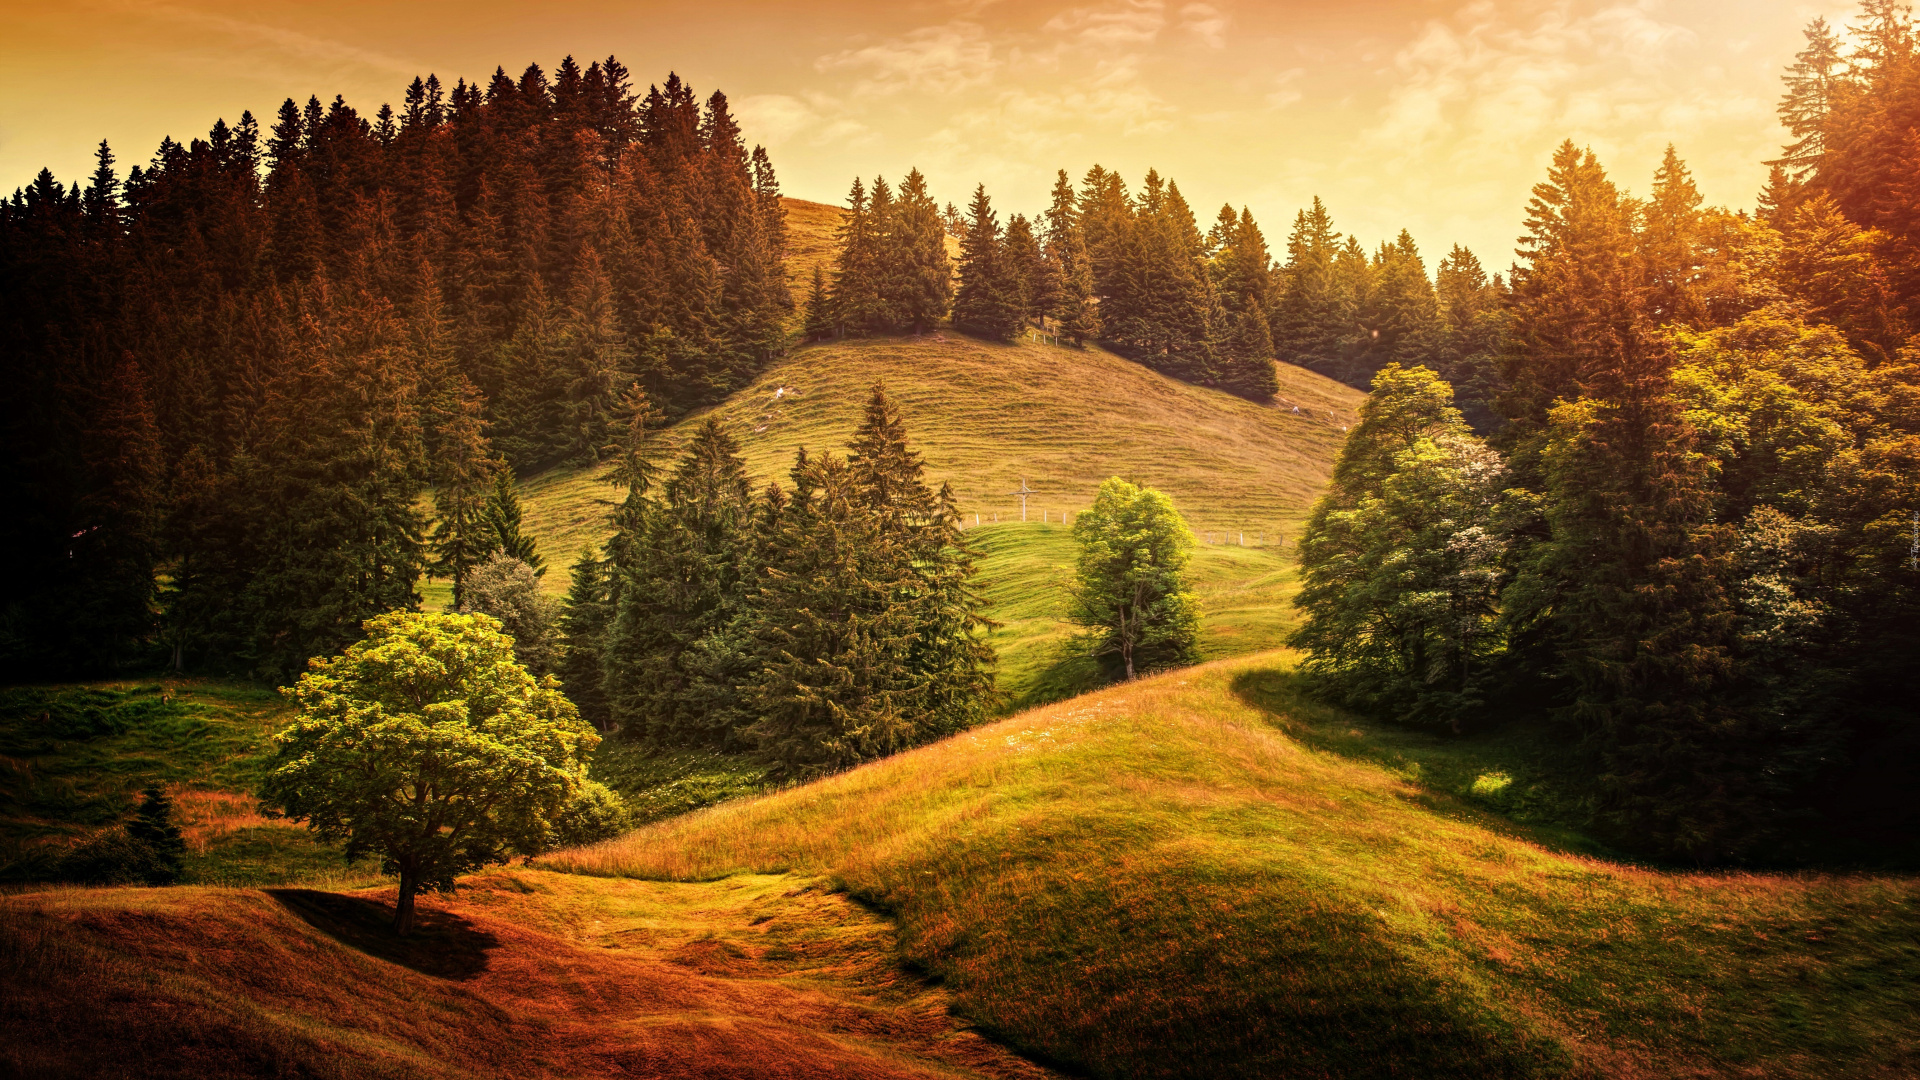 Green Trees on Brown Field During Daytime. Wallpaper in 1920x1080 Resolution